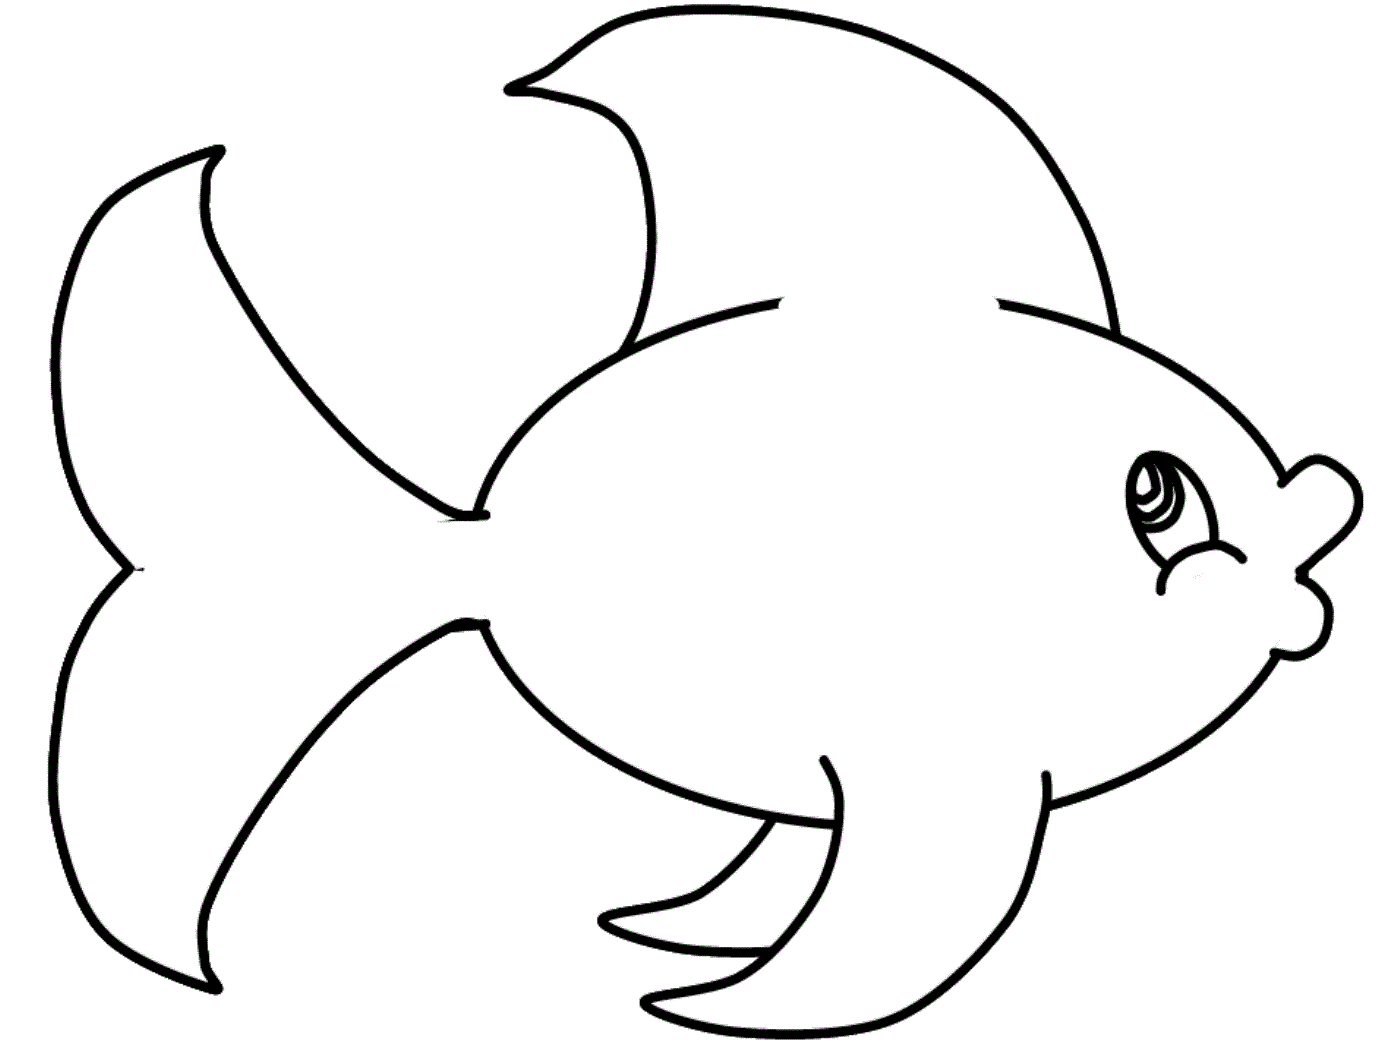 cute-fish-outline-free-download-on-clipartmag